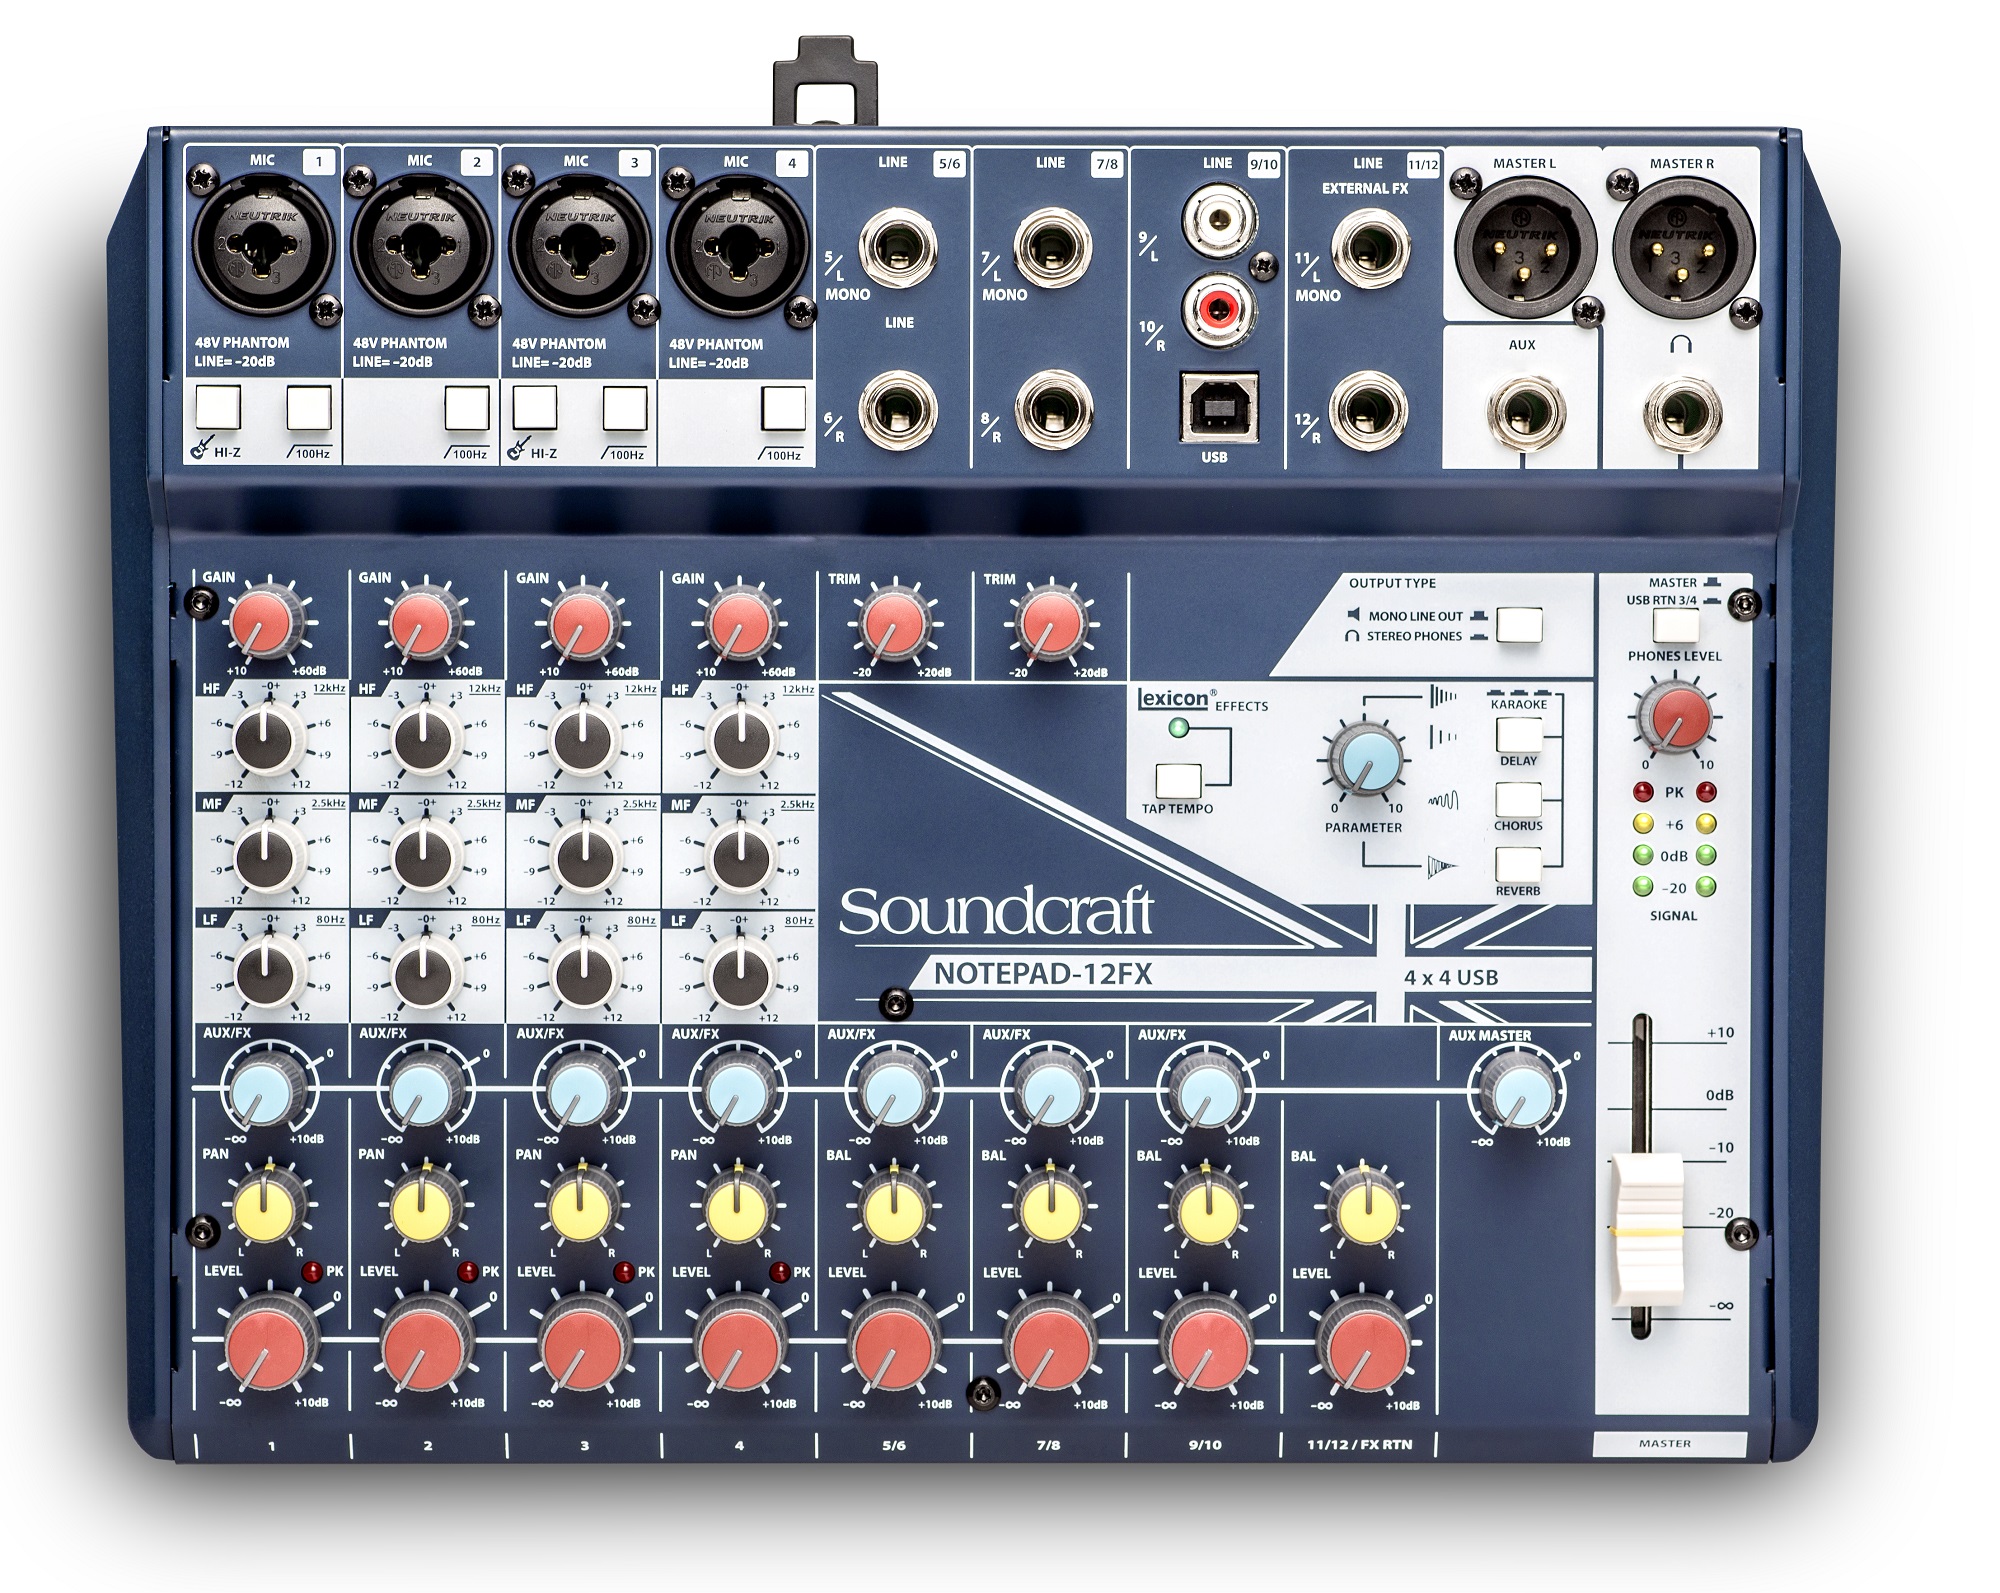 Mixer Soundcraft Notepad-12FX | Anh Duy Audio